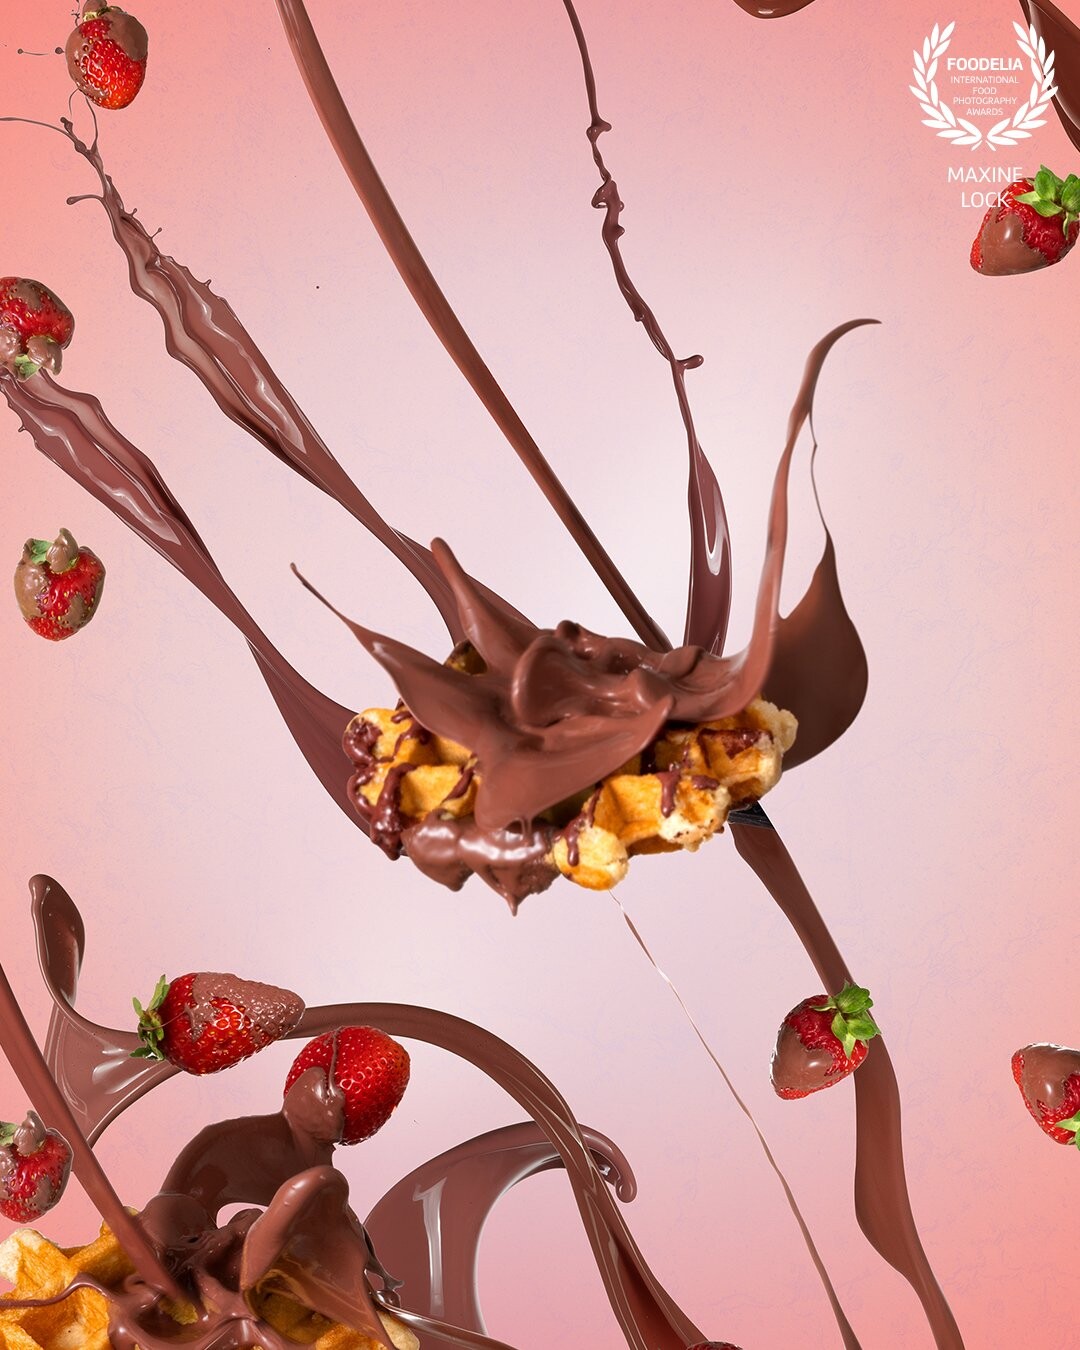 Chocolate splashes colliding with multiple waffles in the image, with strawberries being thrown around along with a pink background to compliment.